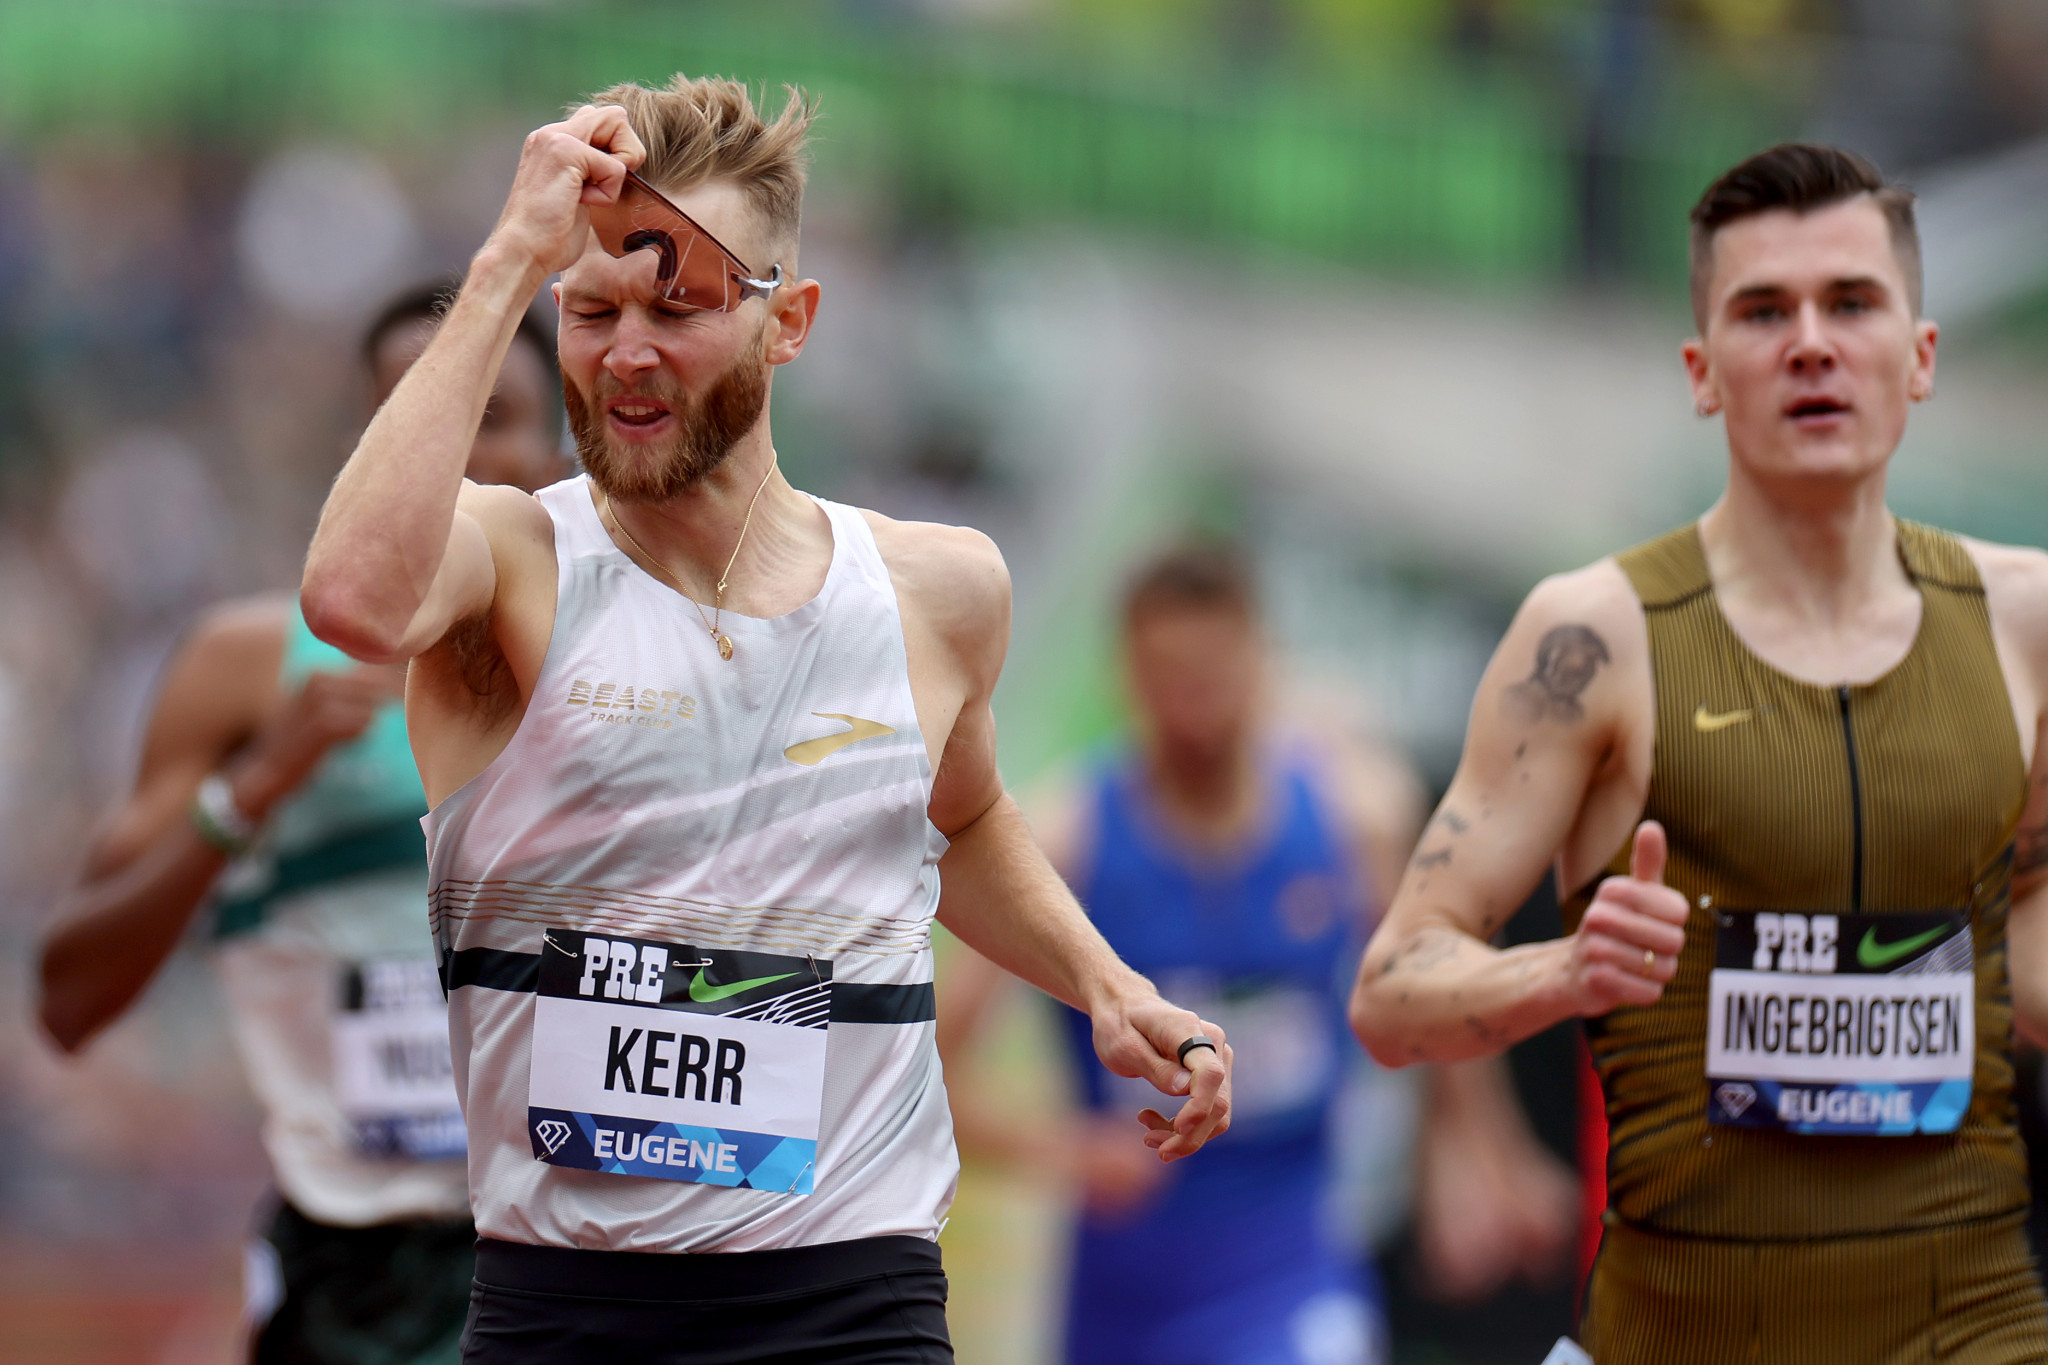 Josh Kerr has set his sights on gold and a new British record at the Paris 2024 Olympics. GETTY IMAGES